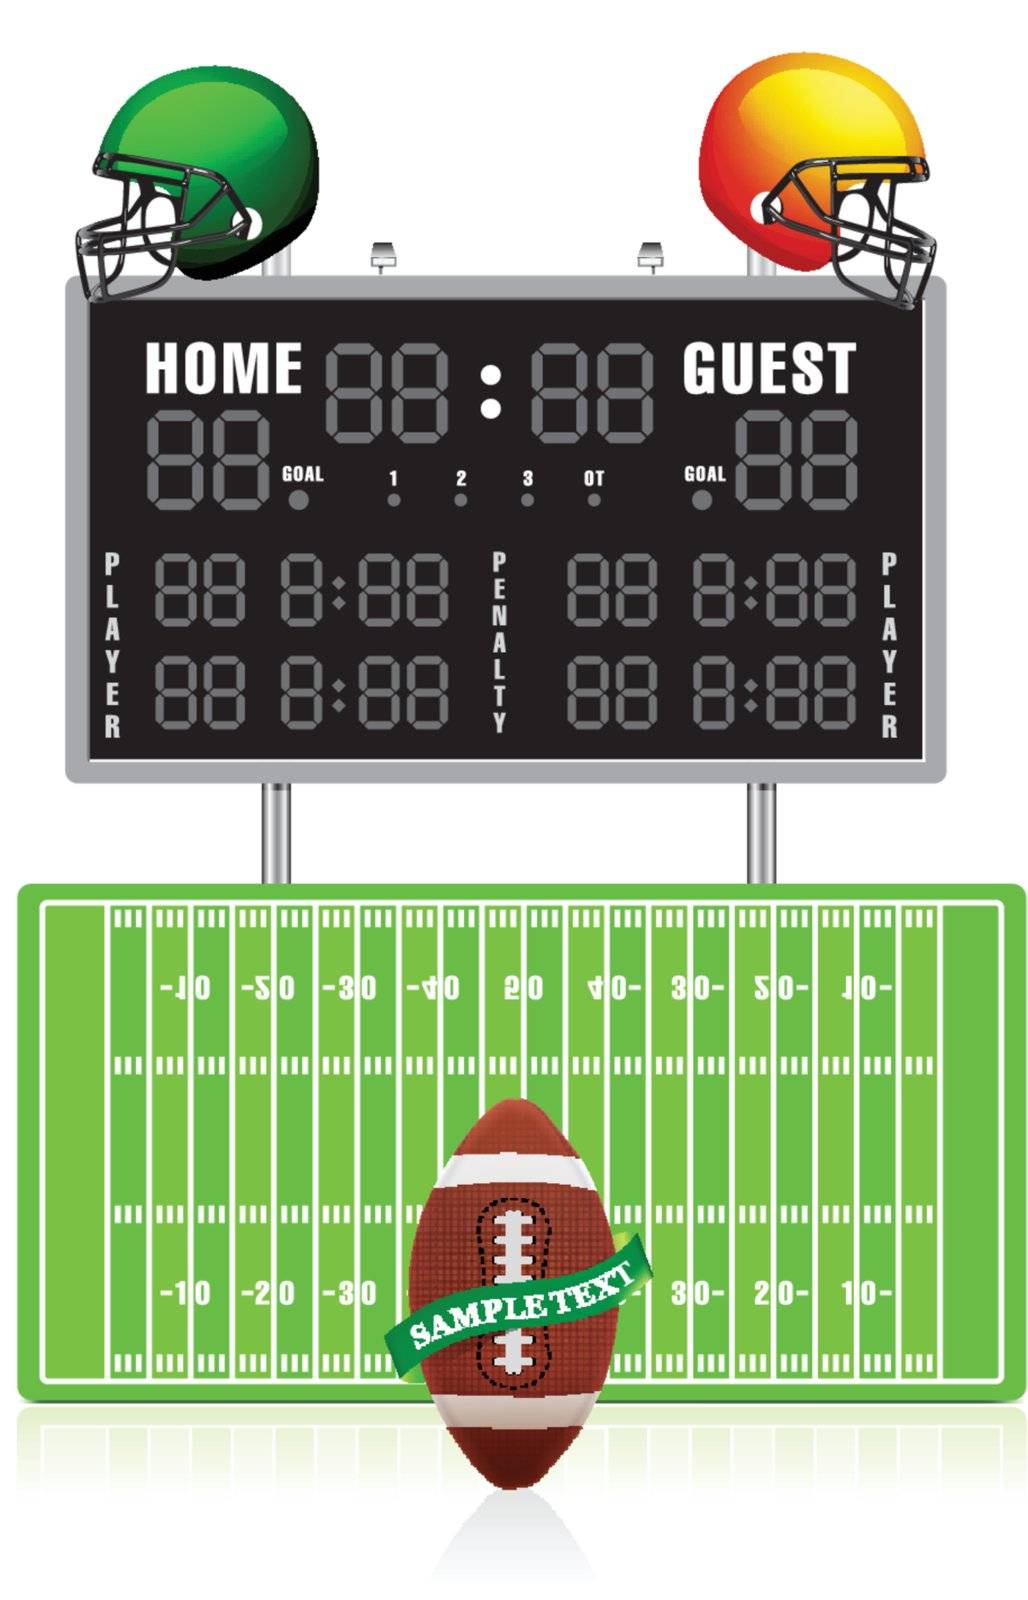 Home and Guest Scoreboard by sermax55